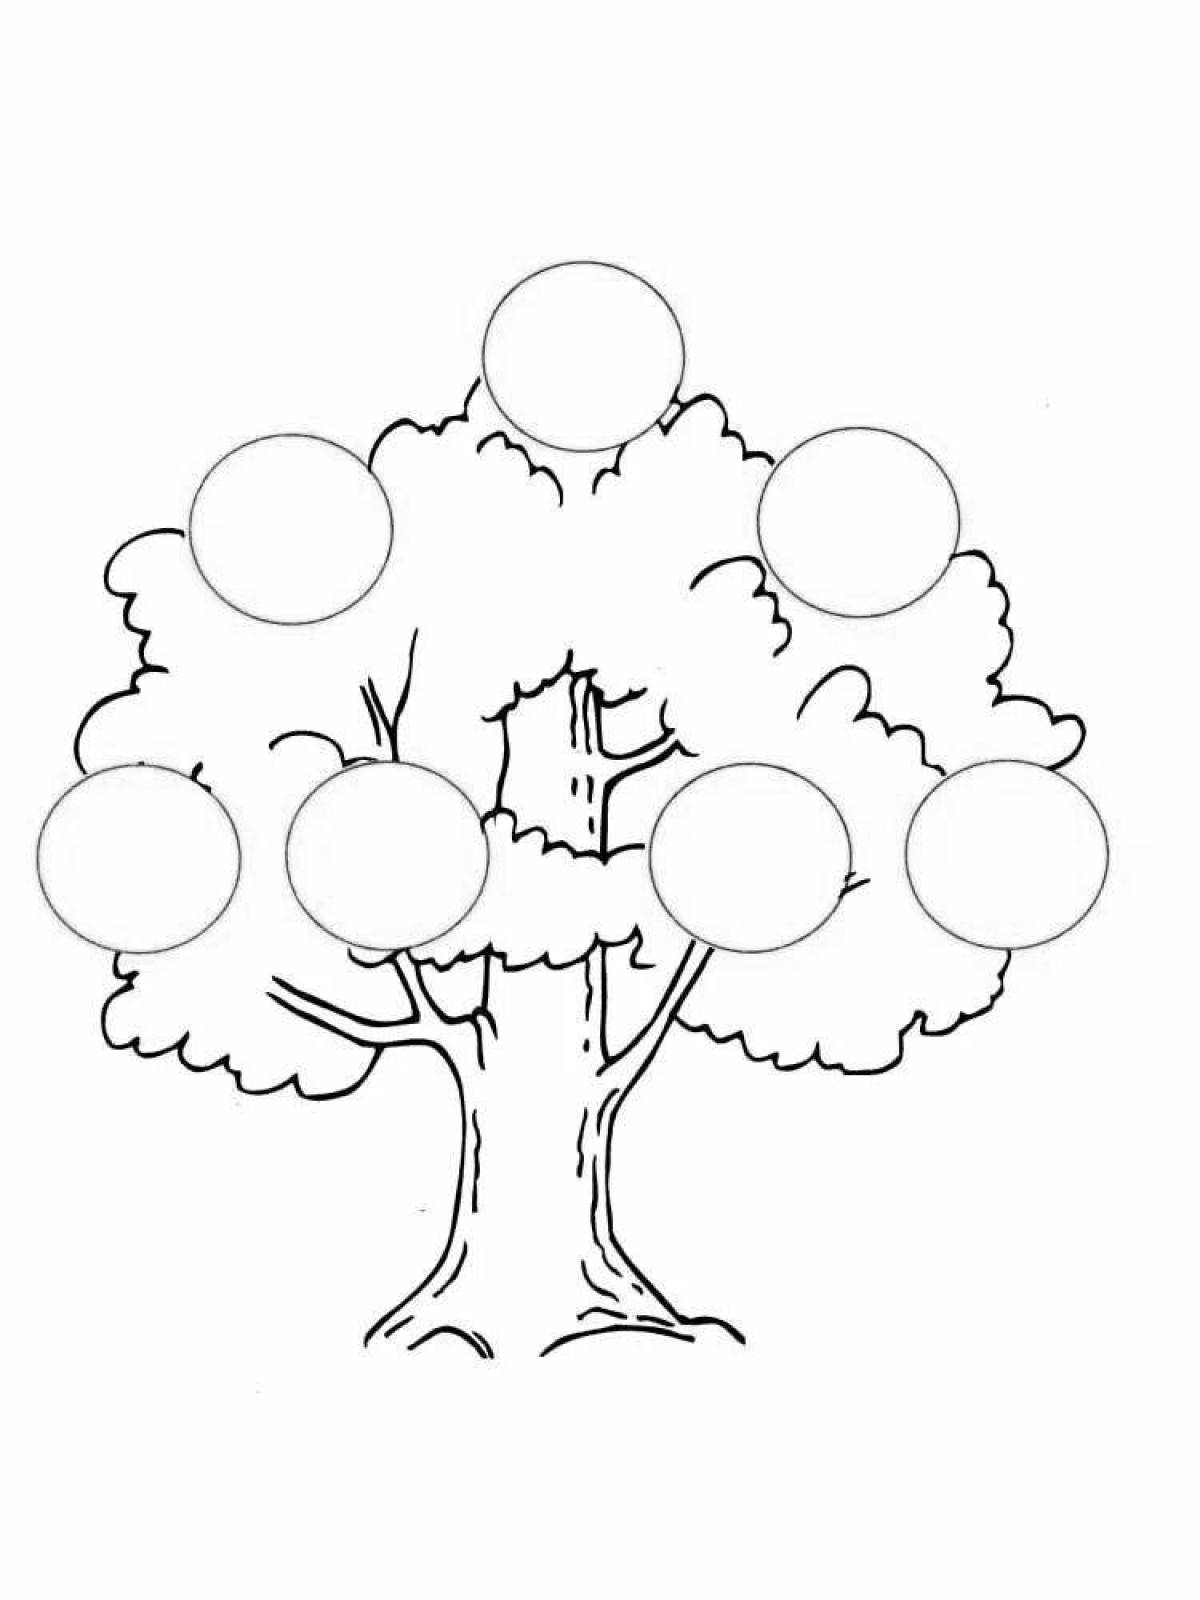 Living family tree coloring page